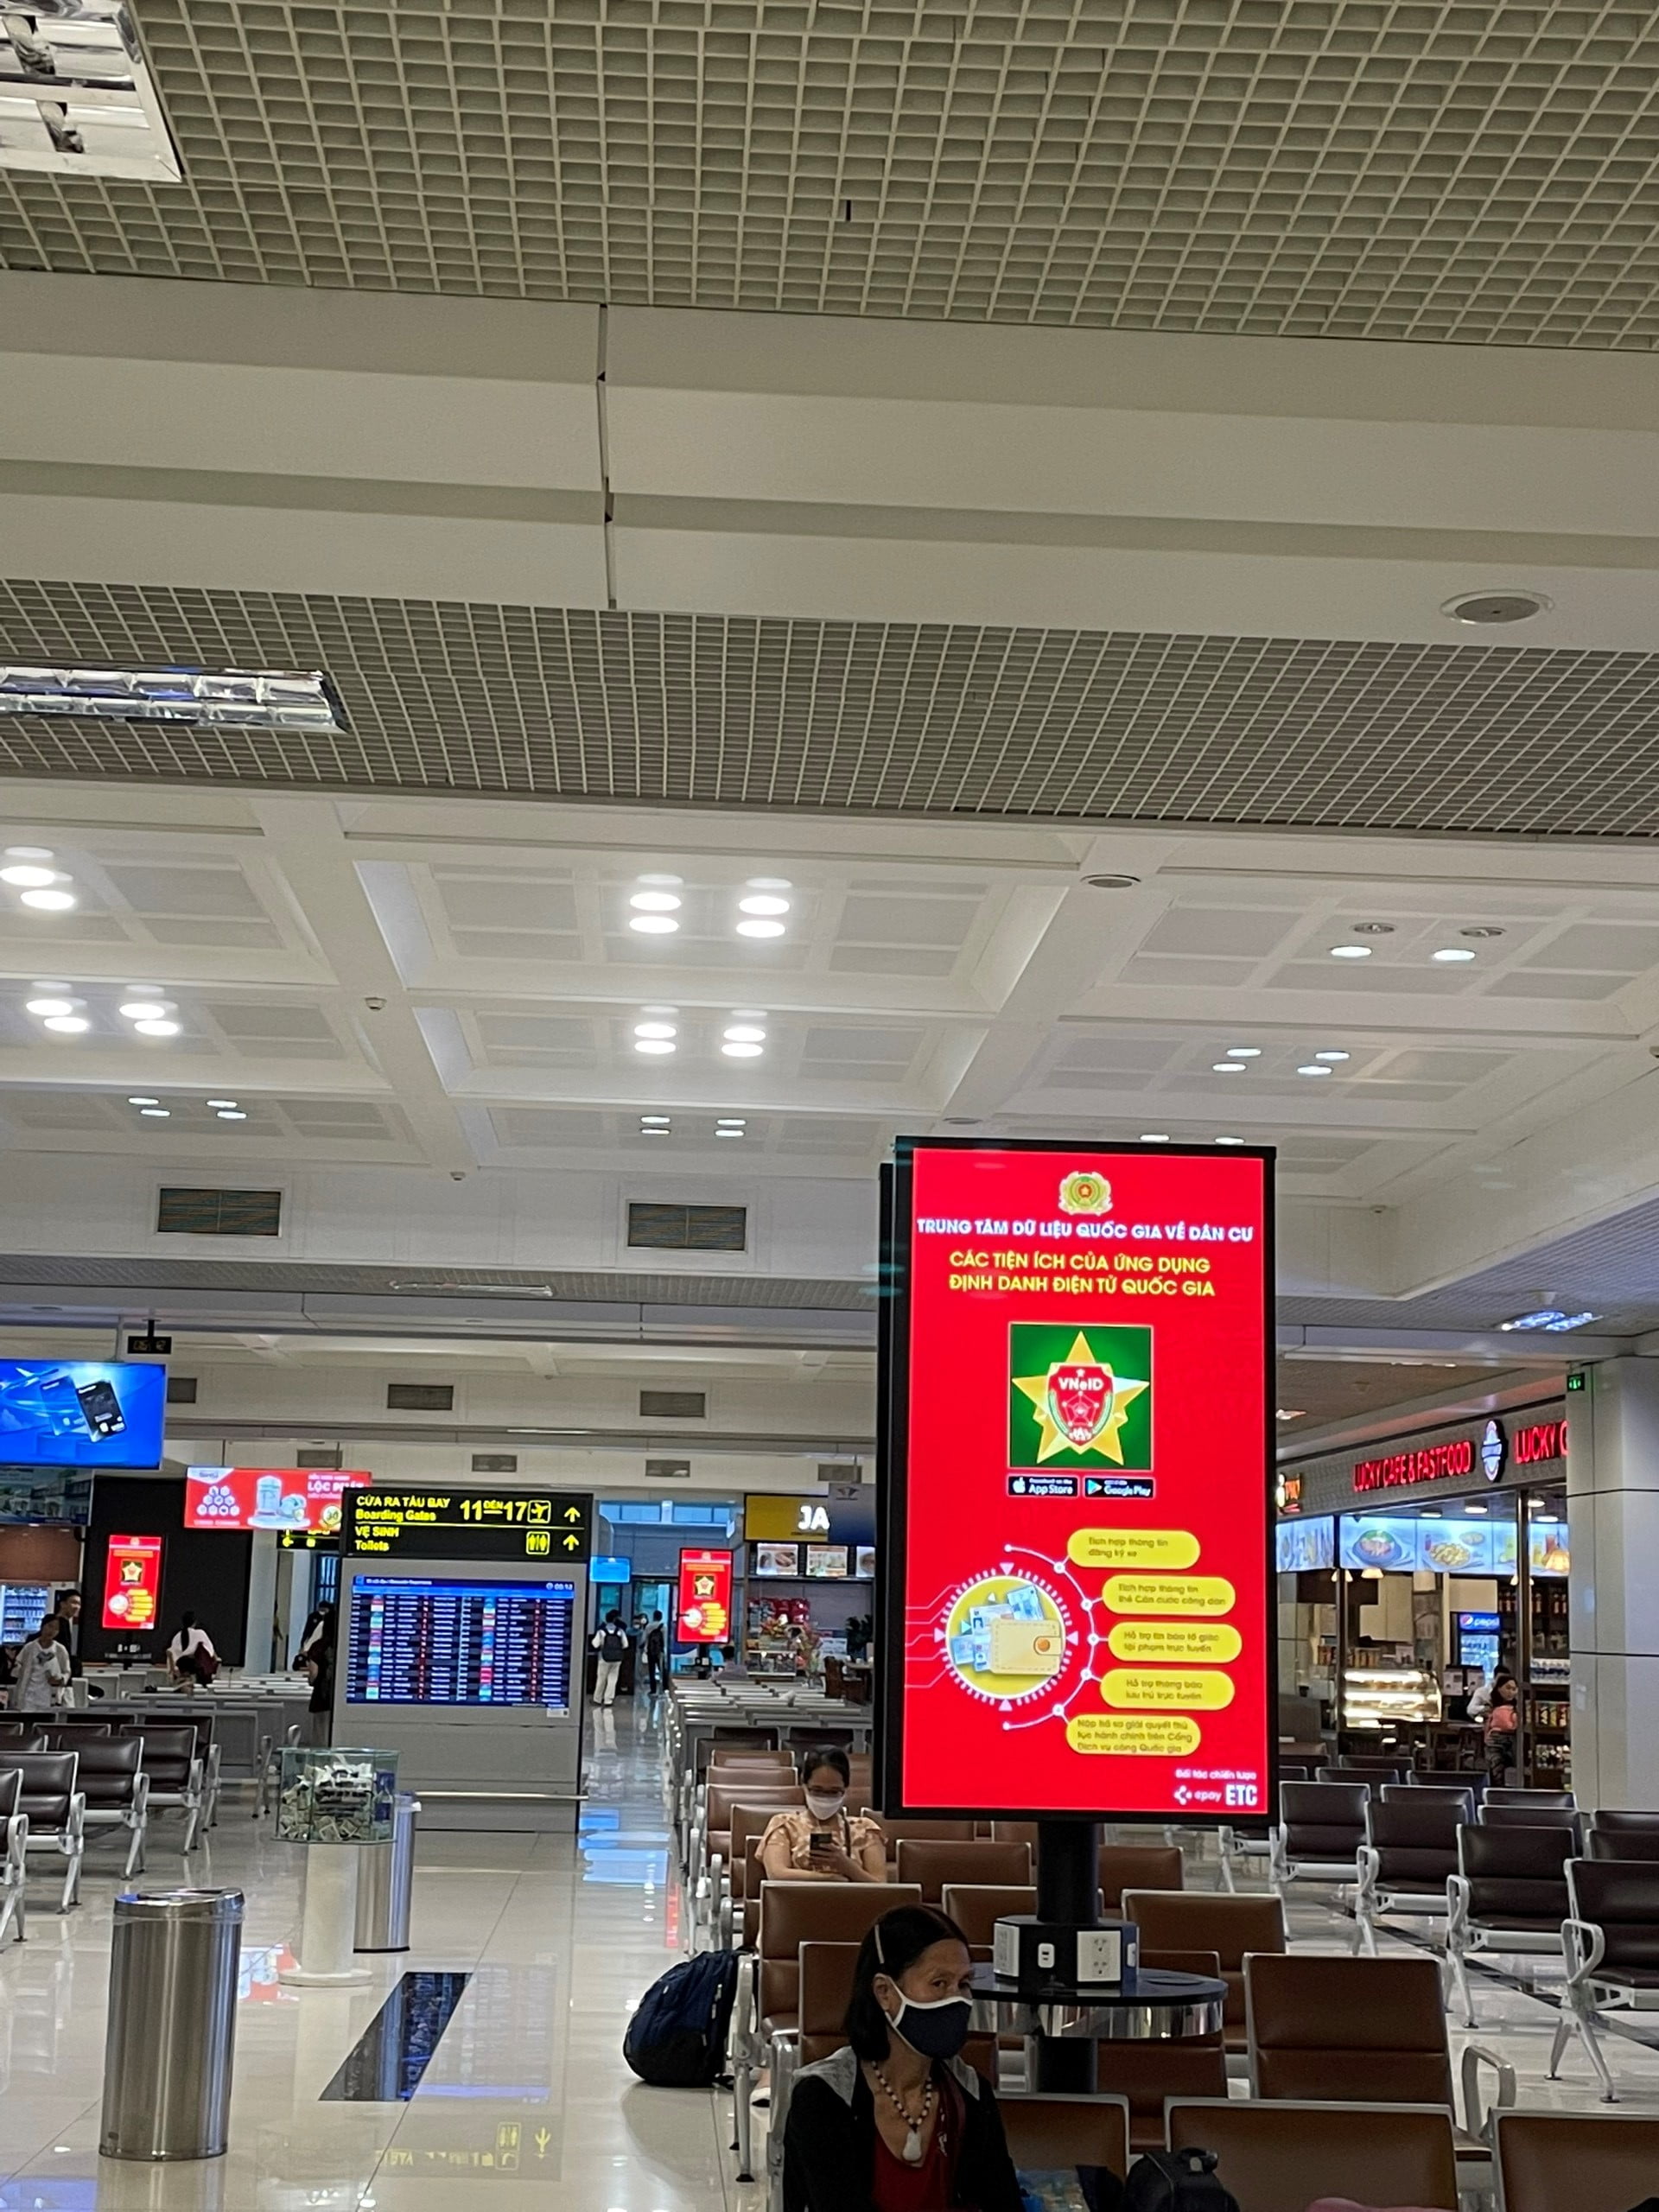 Advertising on phone charging stations at airports